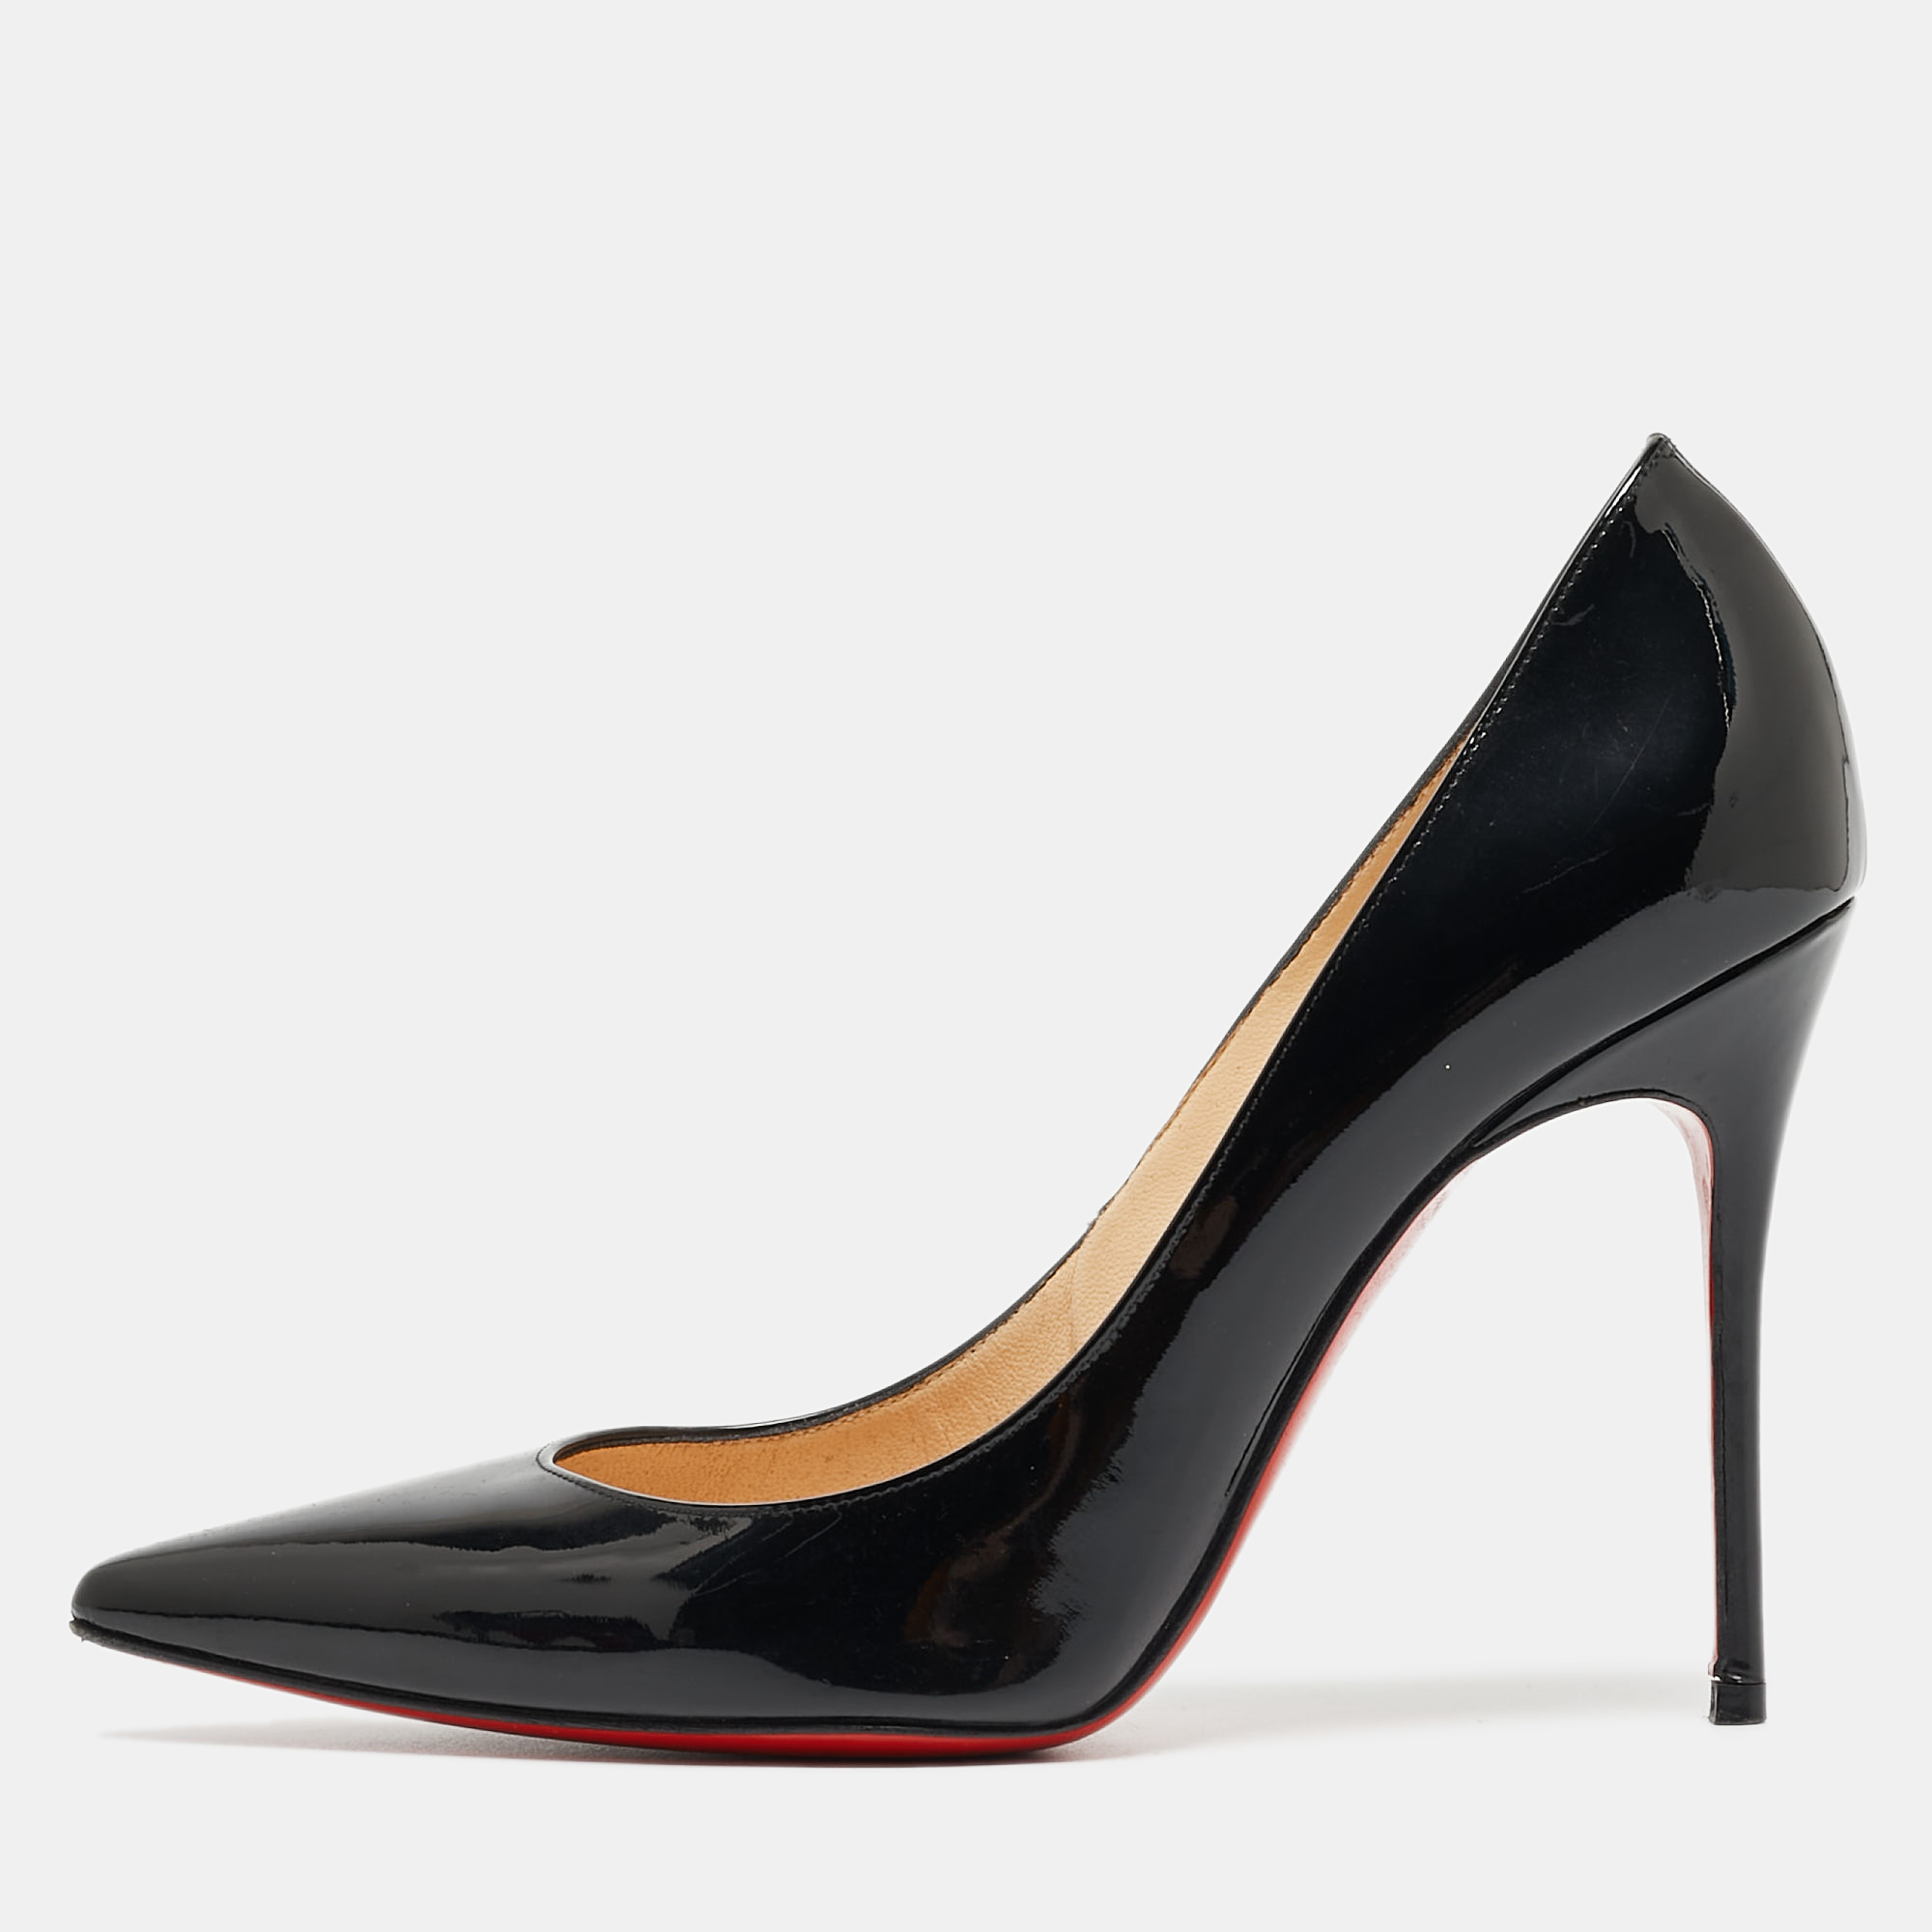 Pre-owned Christian Louboutin Black Patent Pigalle Pumps Size 37